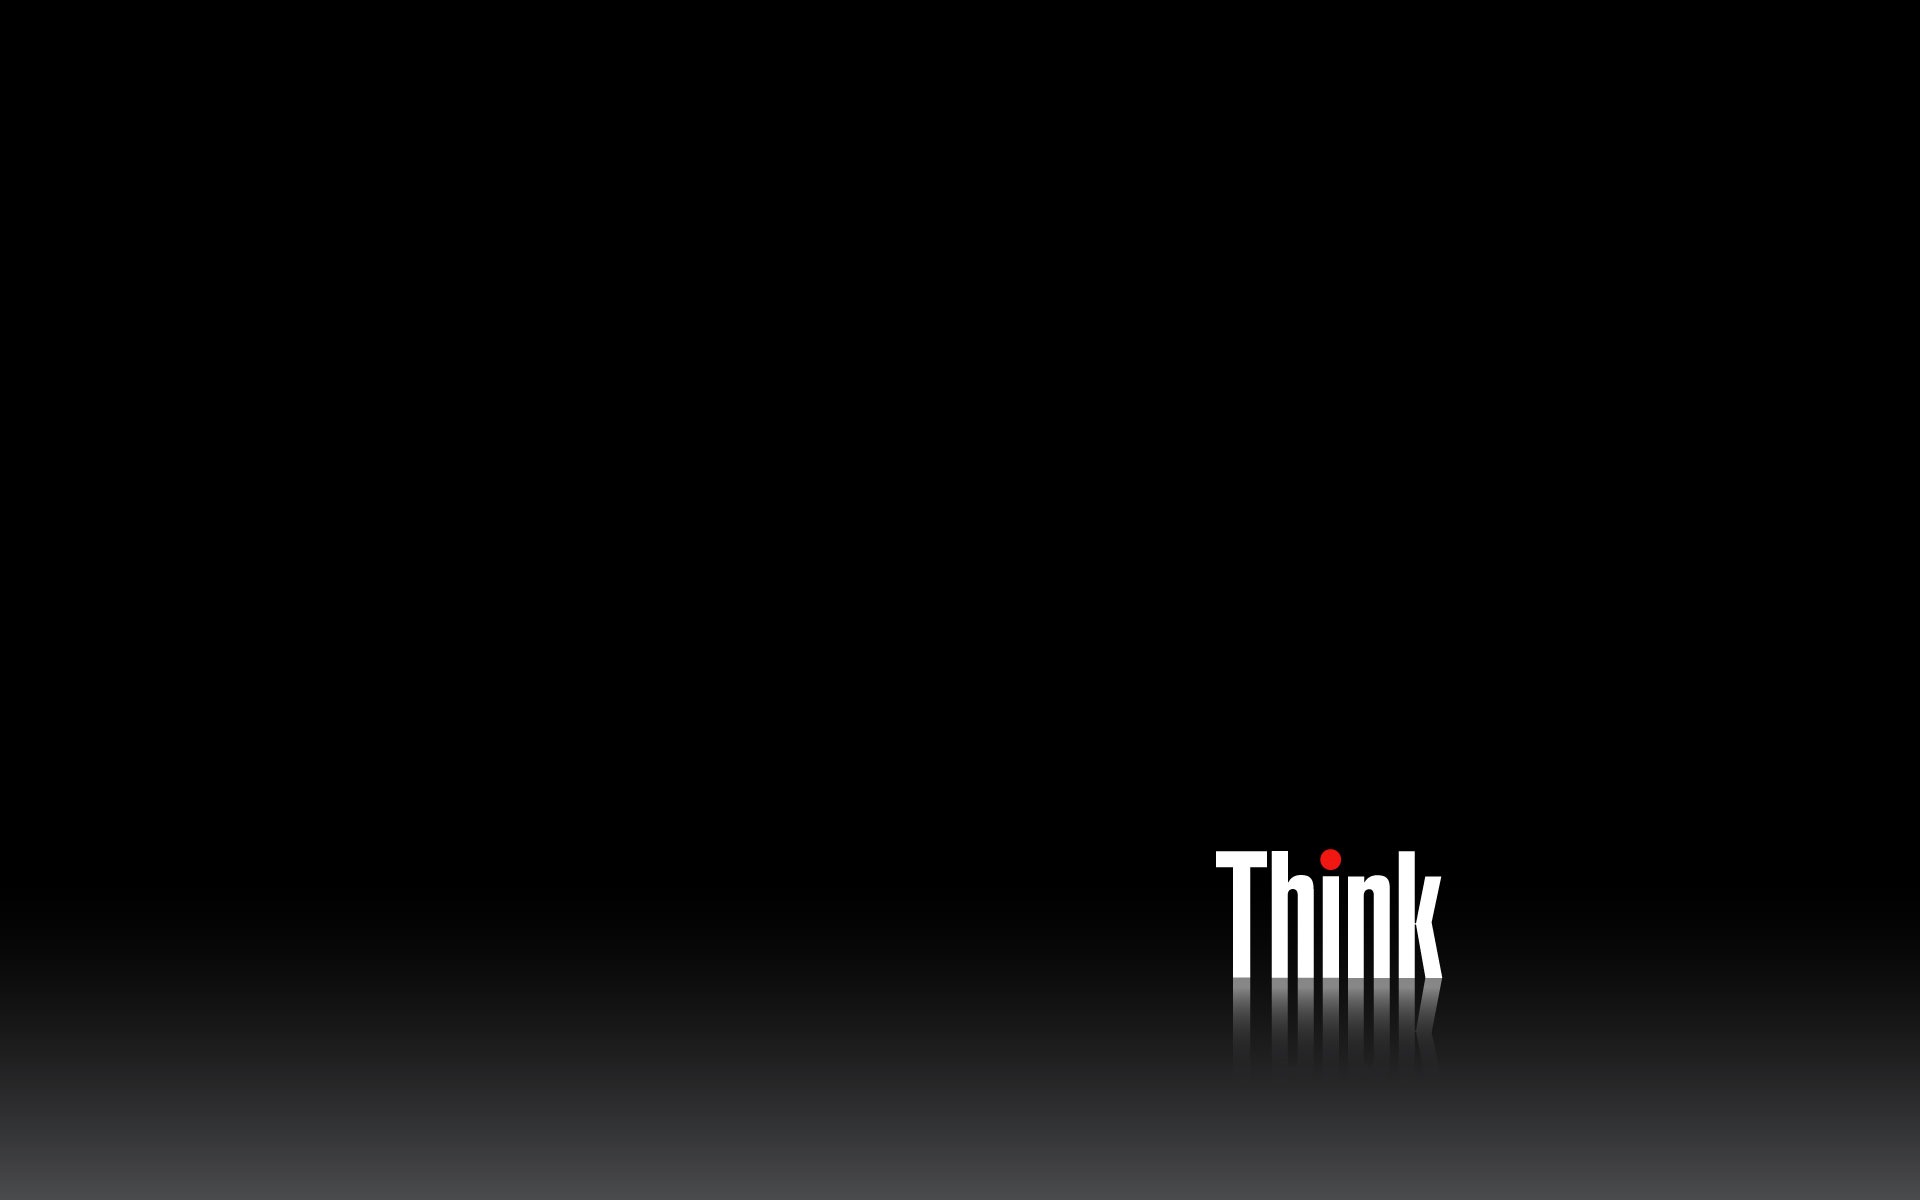  lenovo think wallpapers back here is the black lenovo think wallpaper 1920x1200